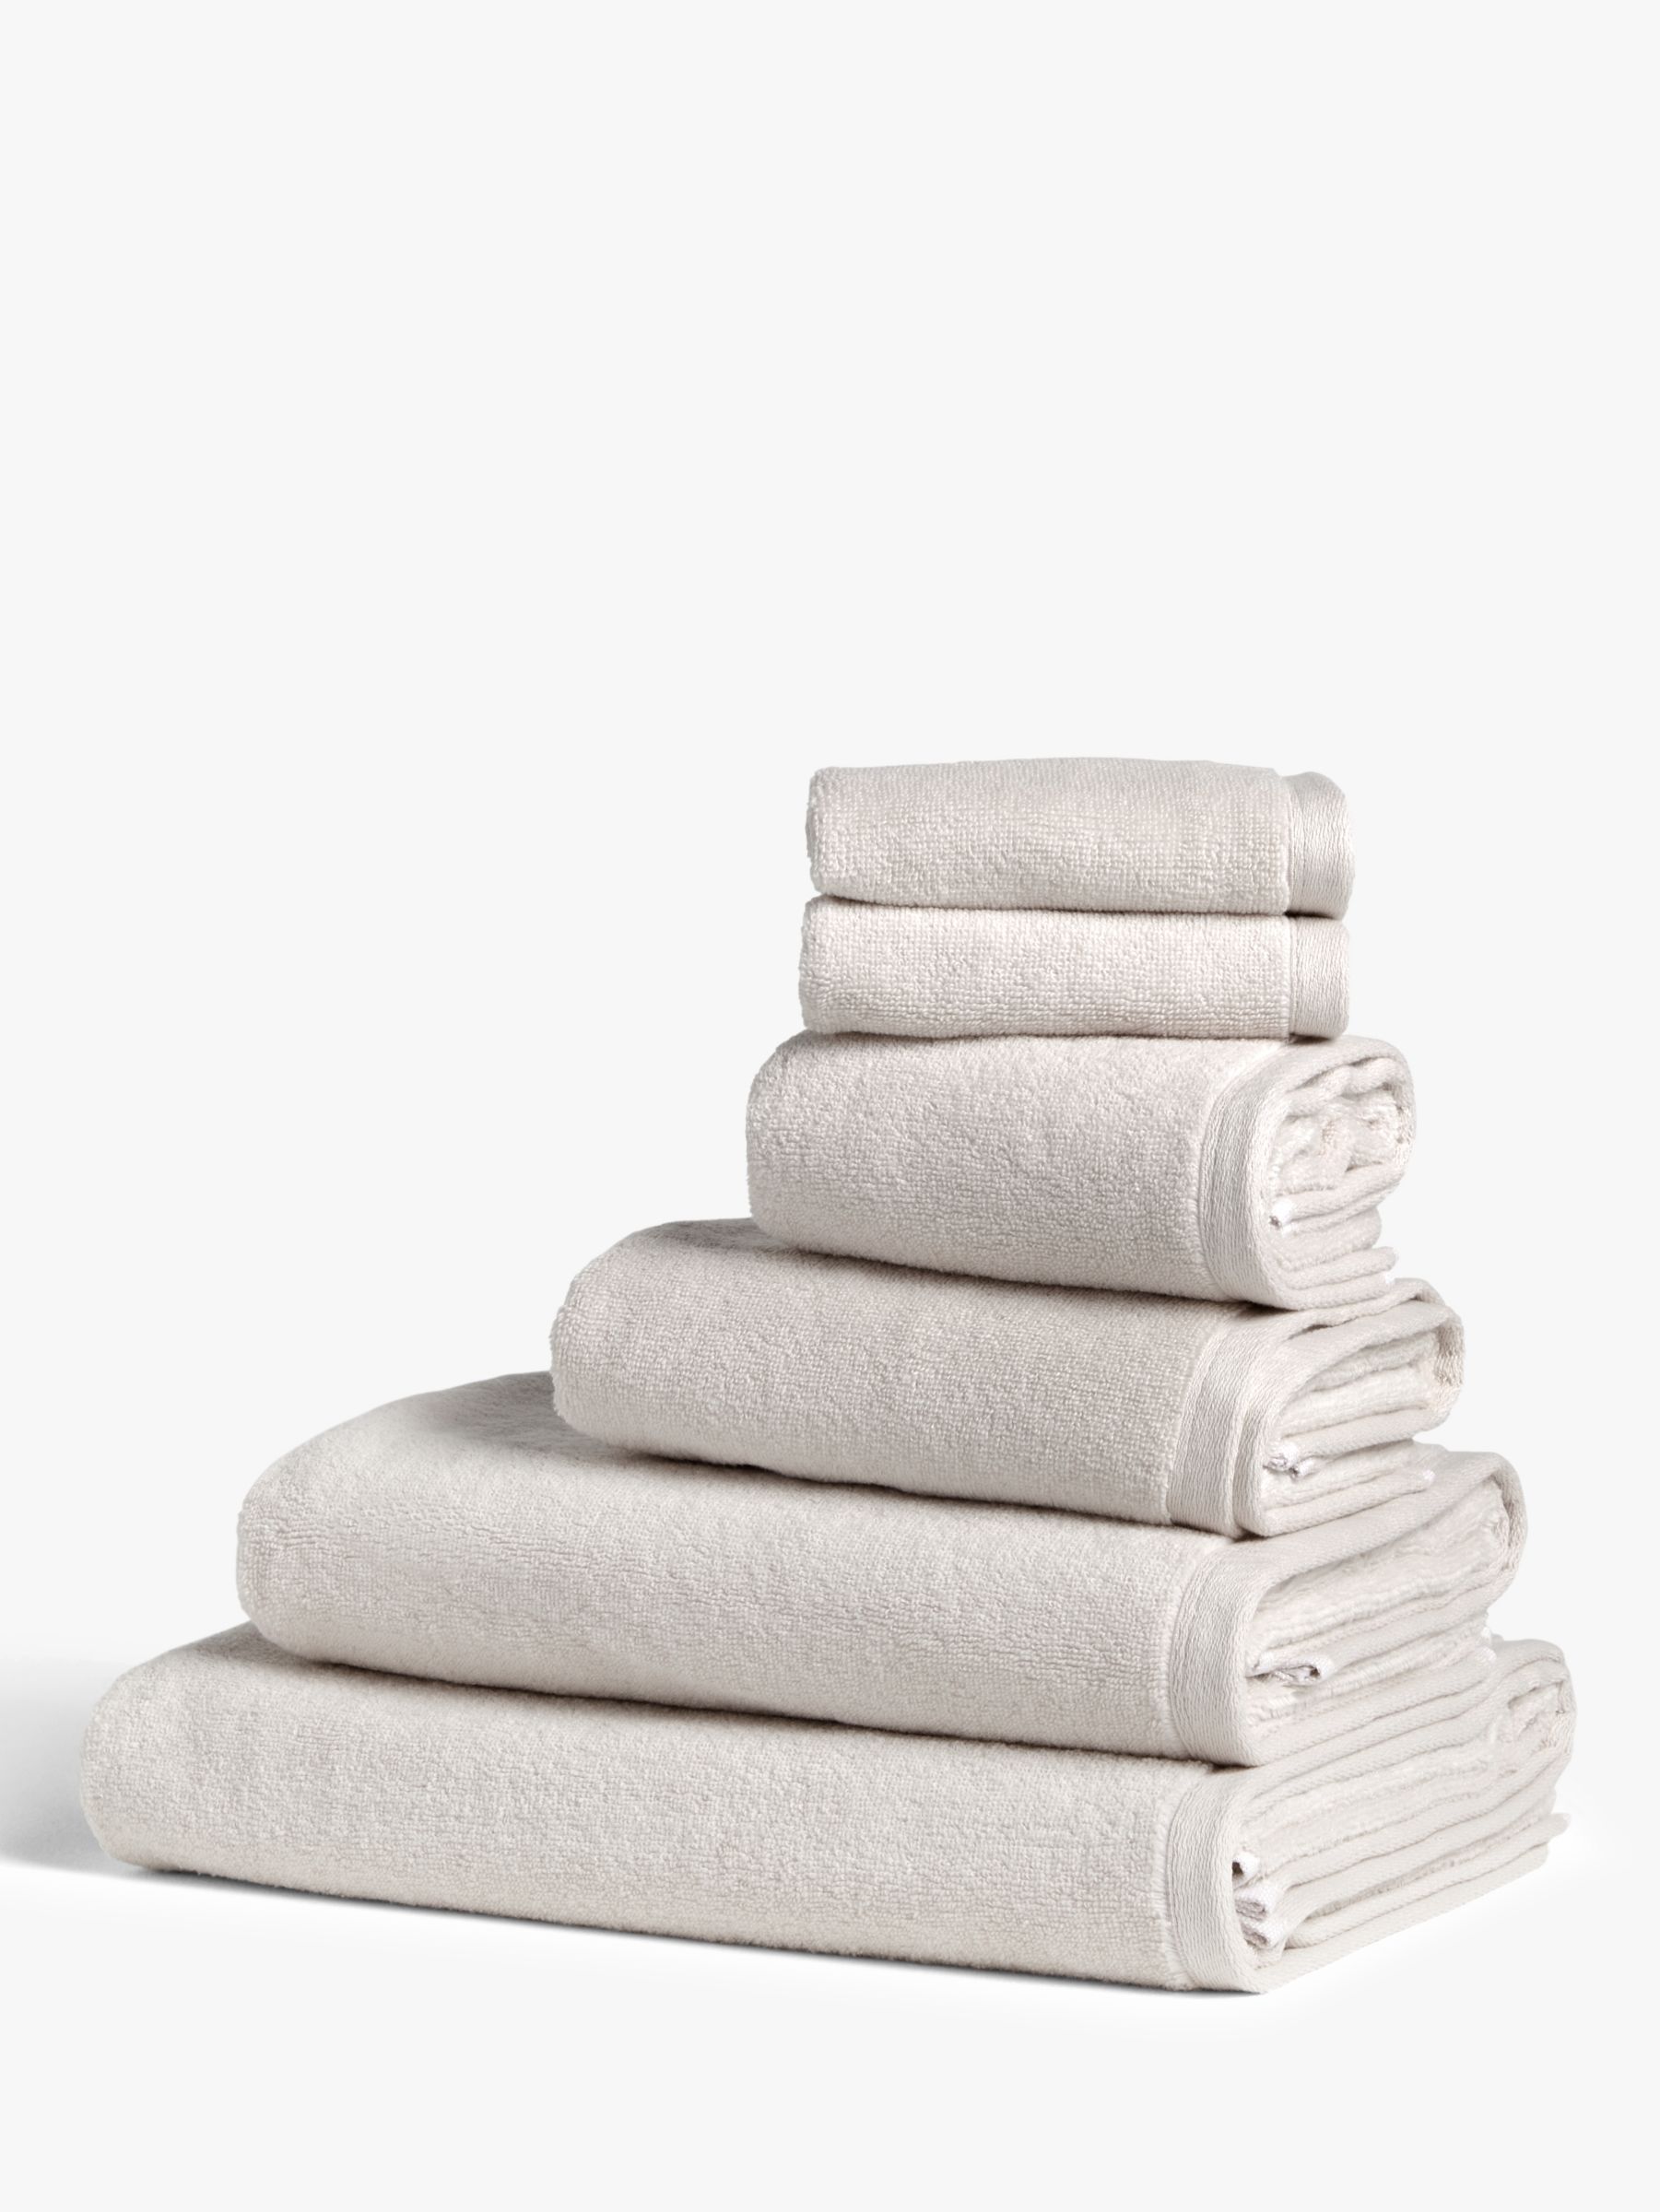 House by John Lewis Quick Dry Towels